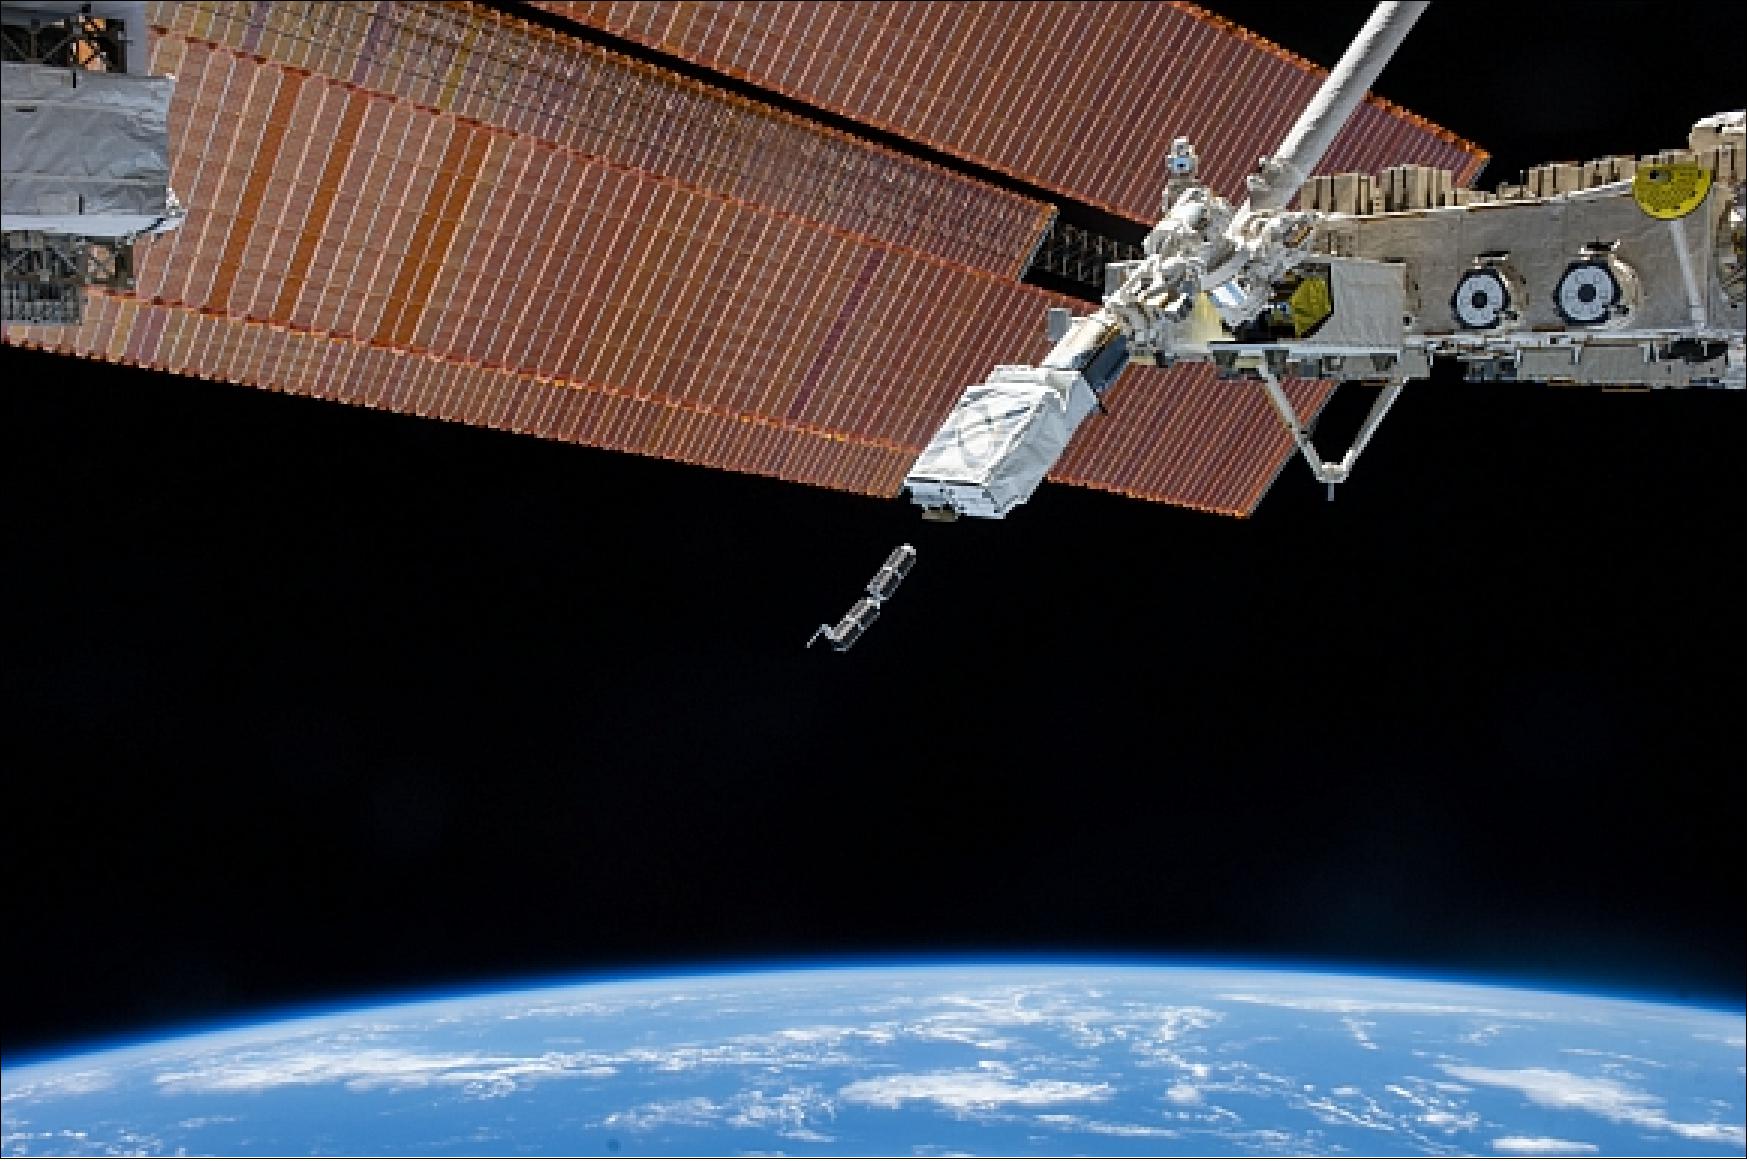 Figure 51: Deployment of the first two Flock 1 nanosatellites from the NanoRacks deployer system attached to the Kibo robotic arm (image credit: NASA)